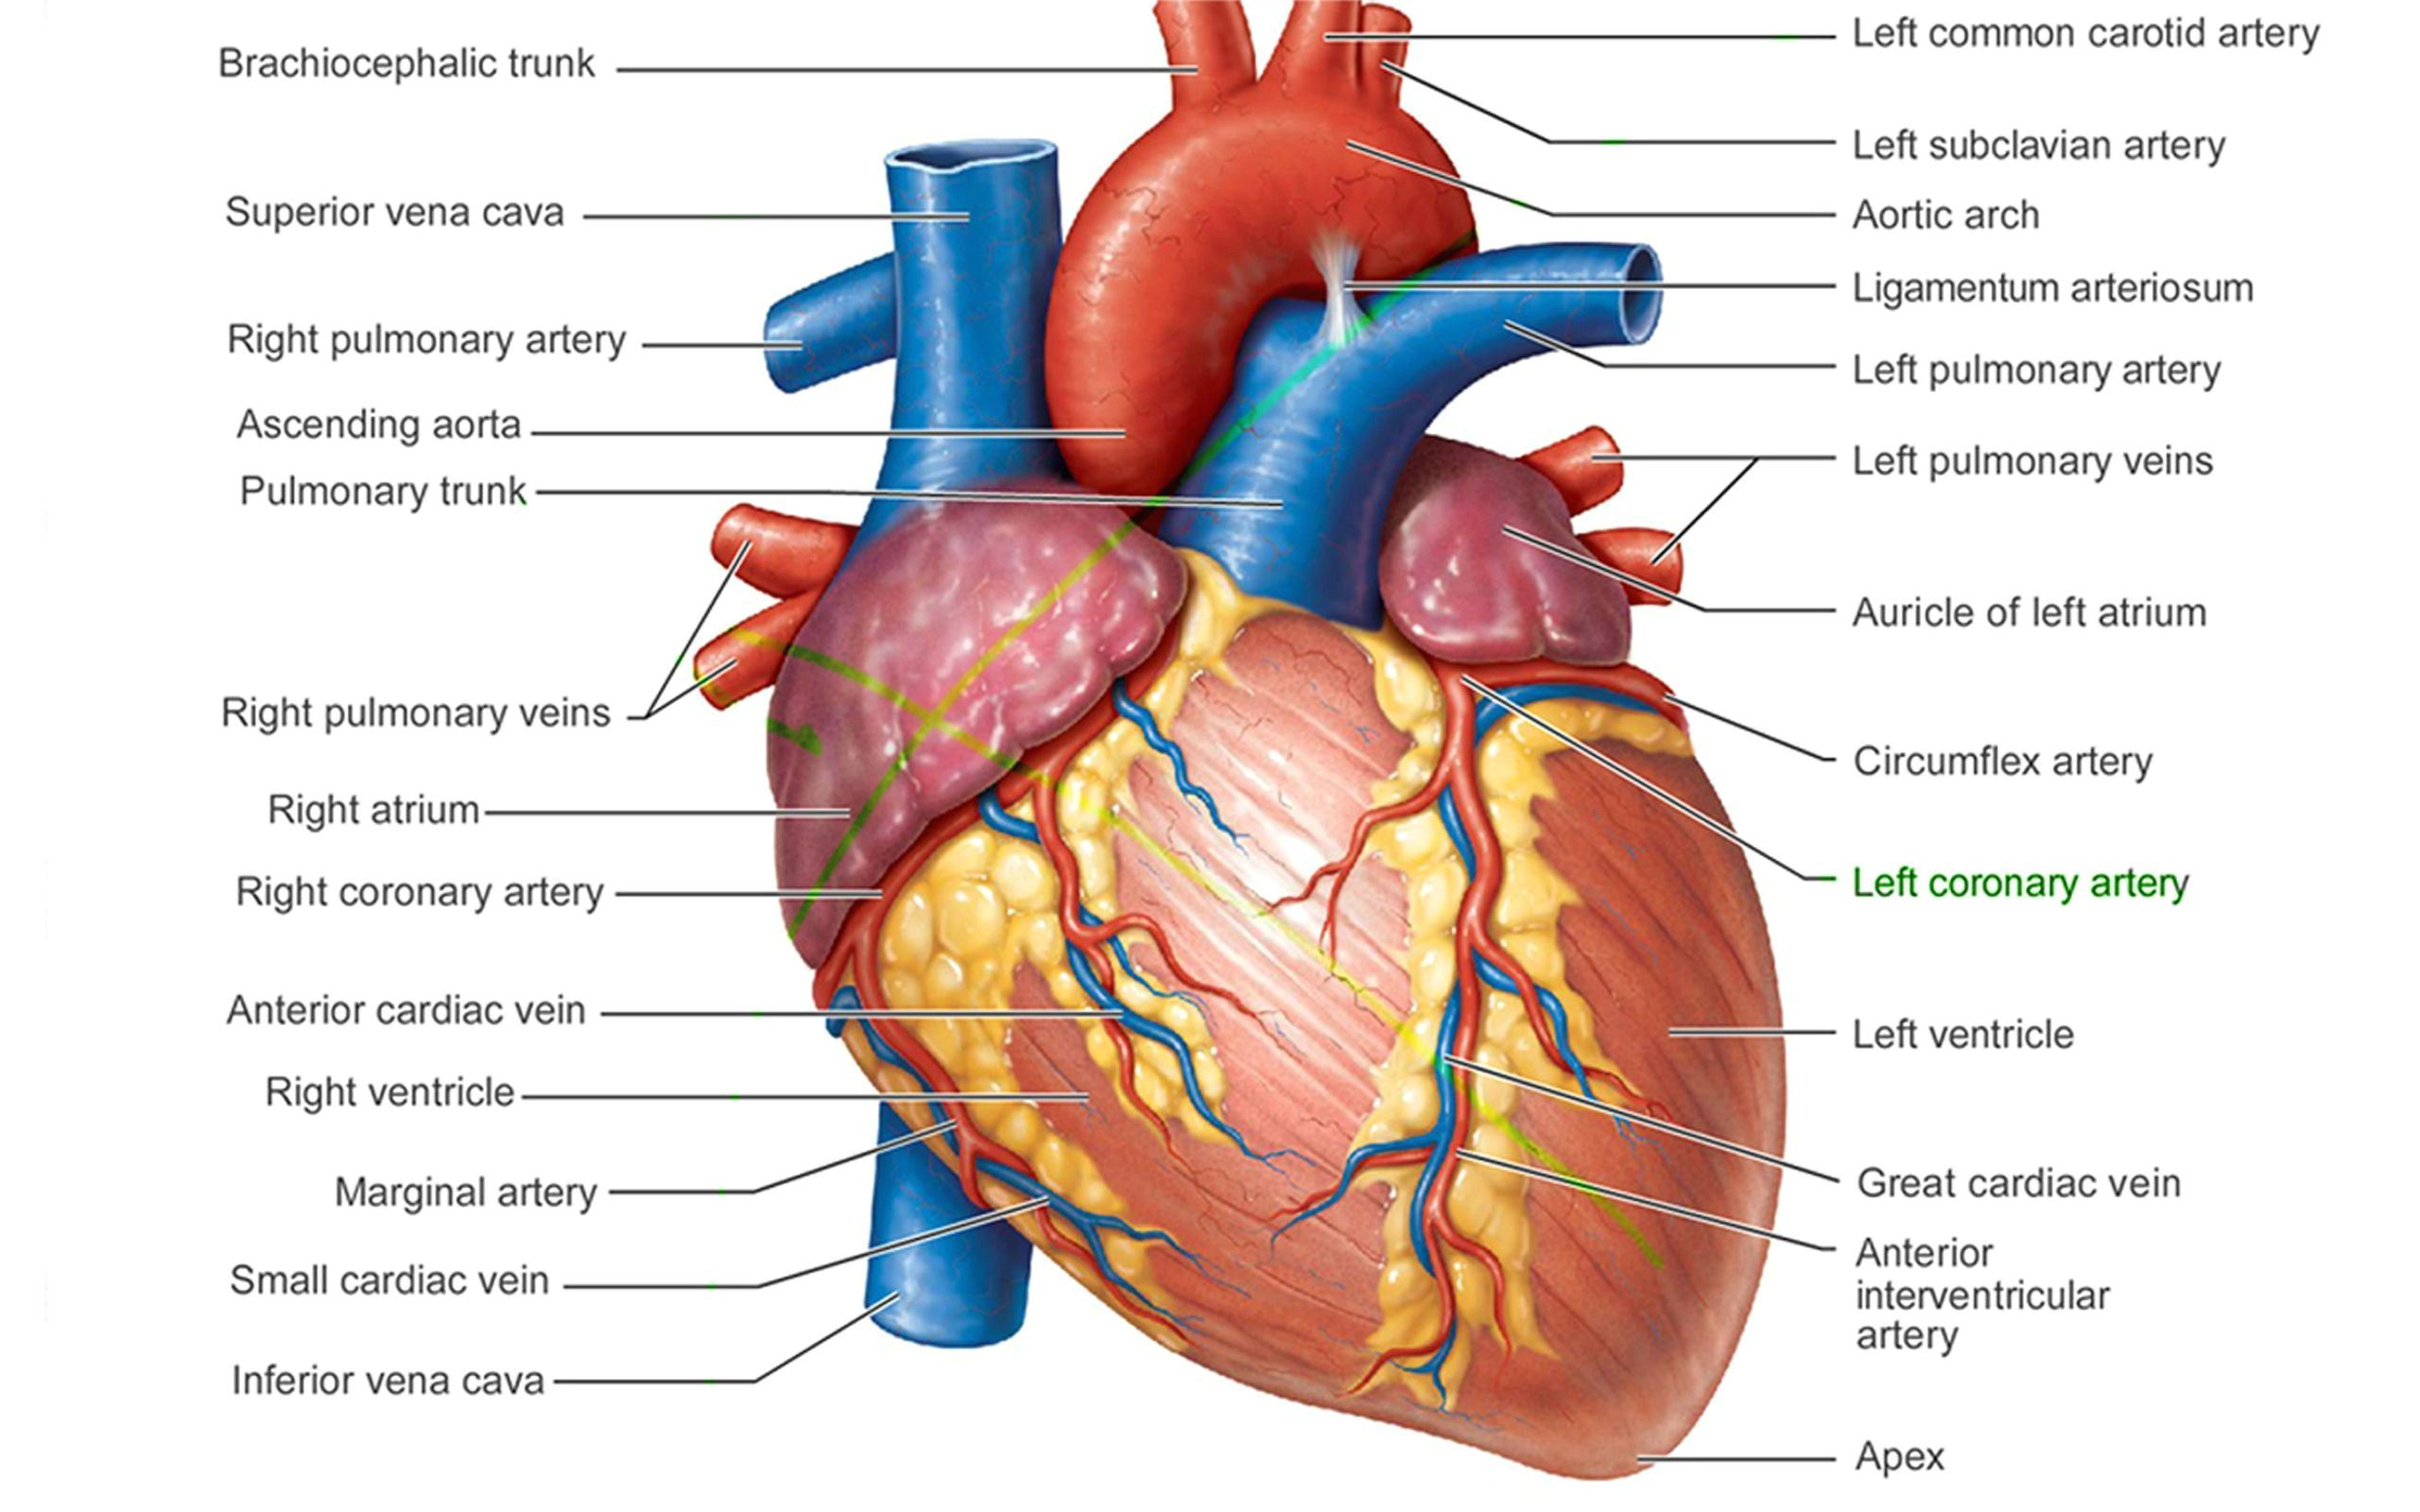 Biological Drawing Of A Heart Dissection Pictures Of Human Heart Anatomy Anatomy Of the Human Heart 4k Ultra